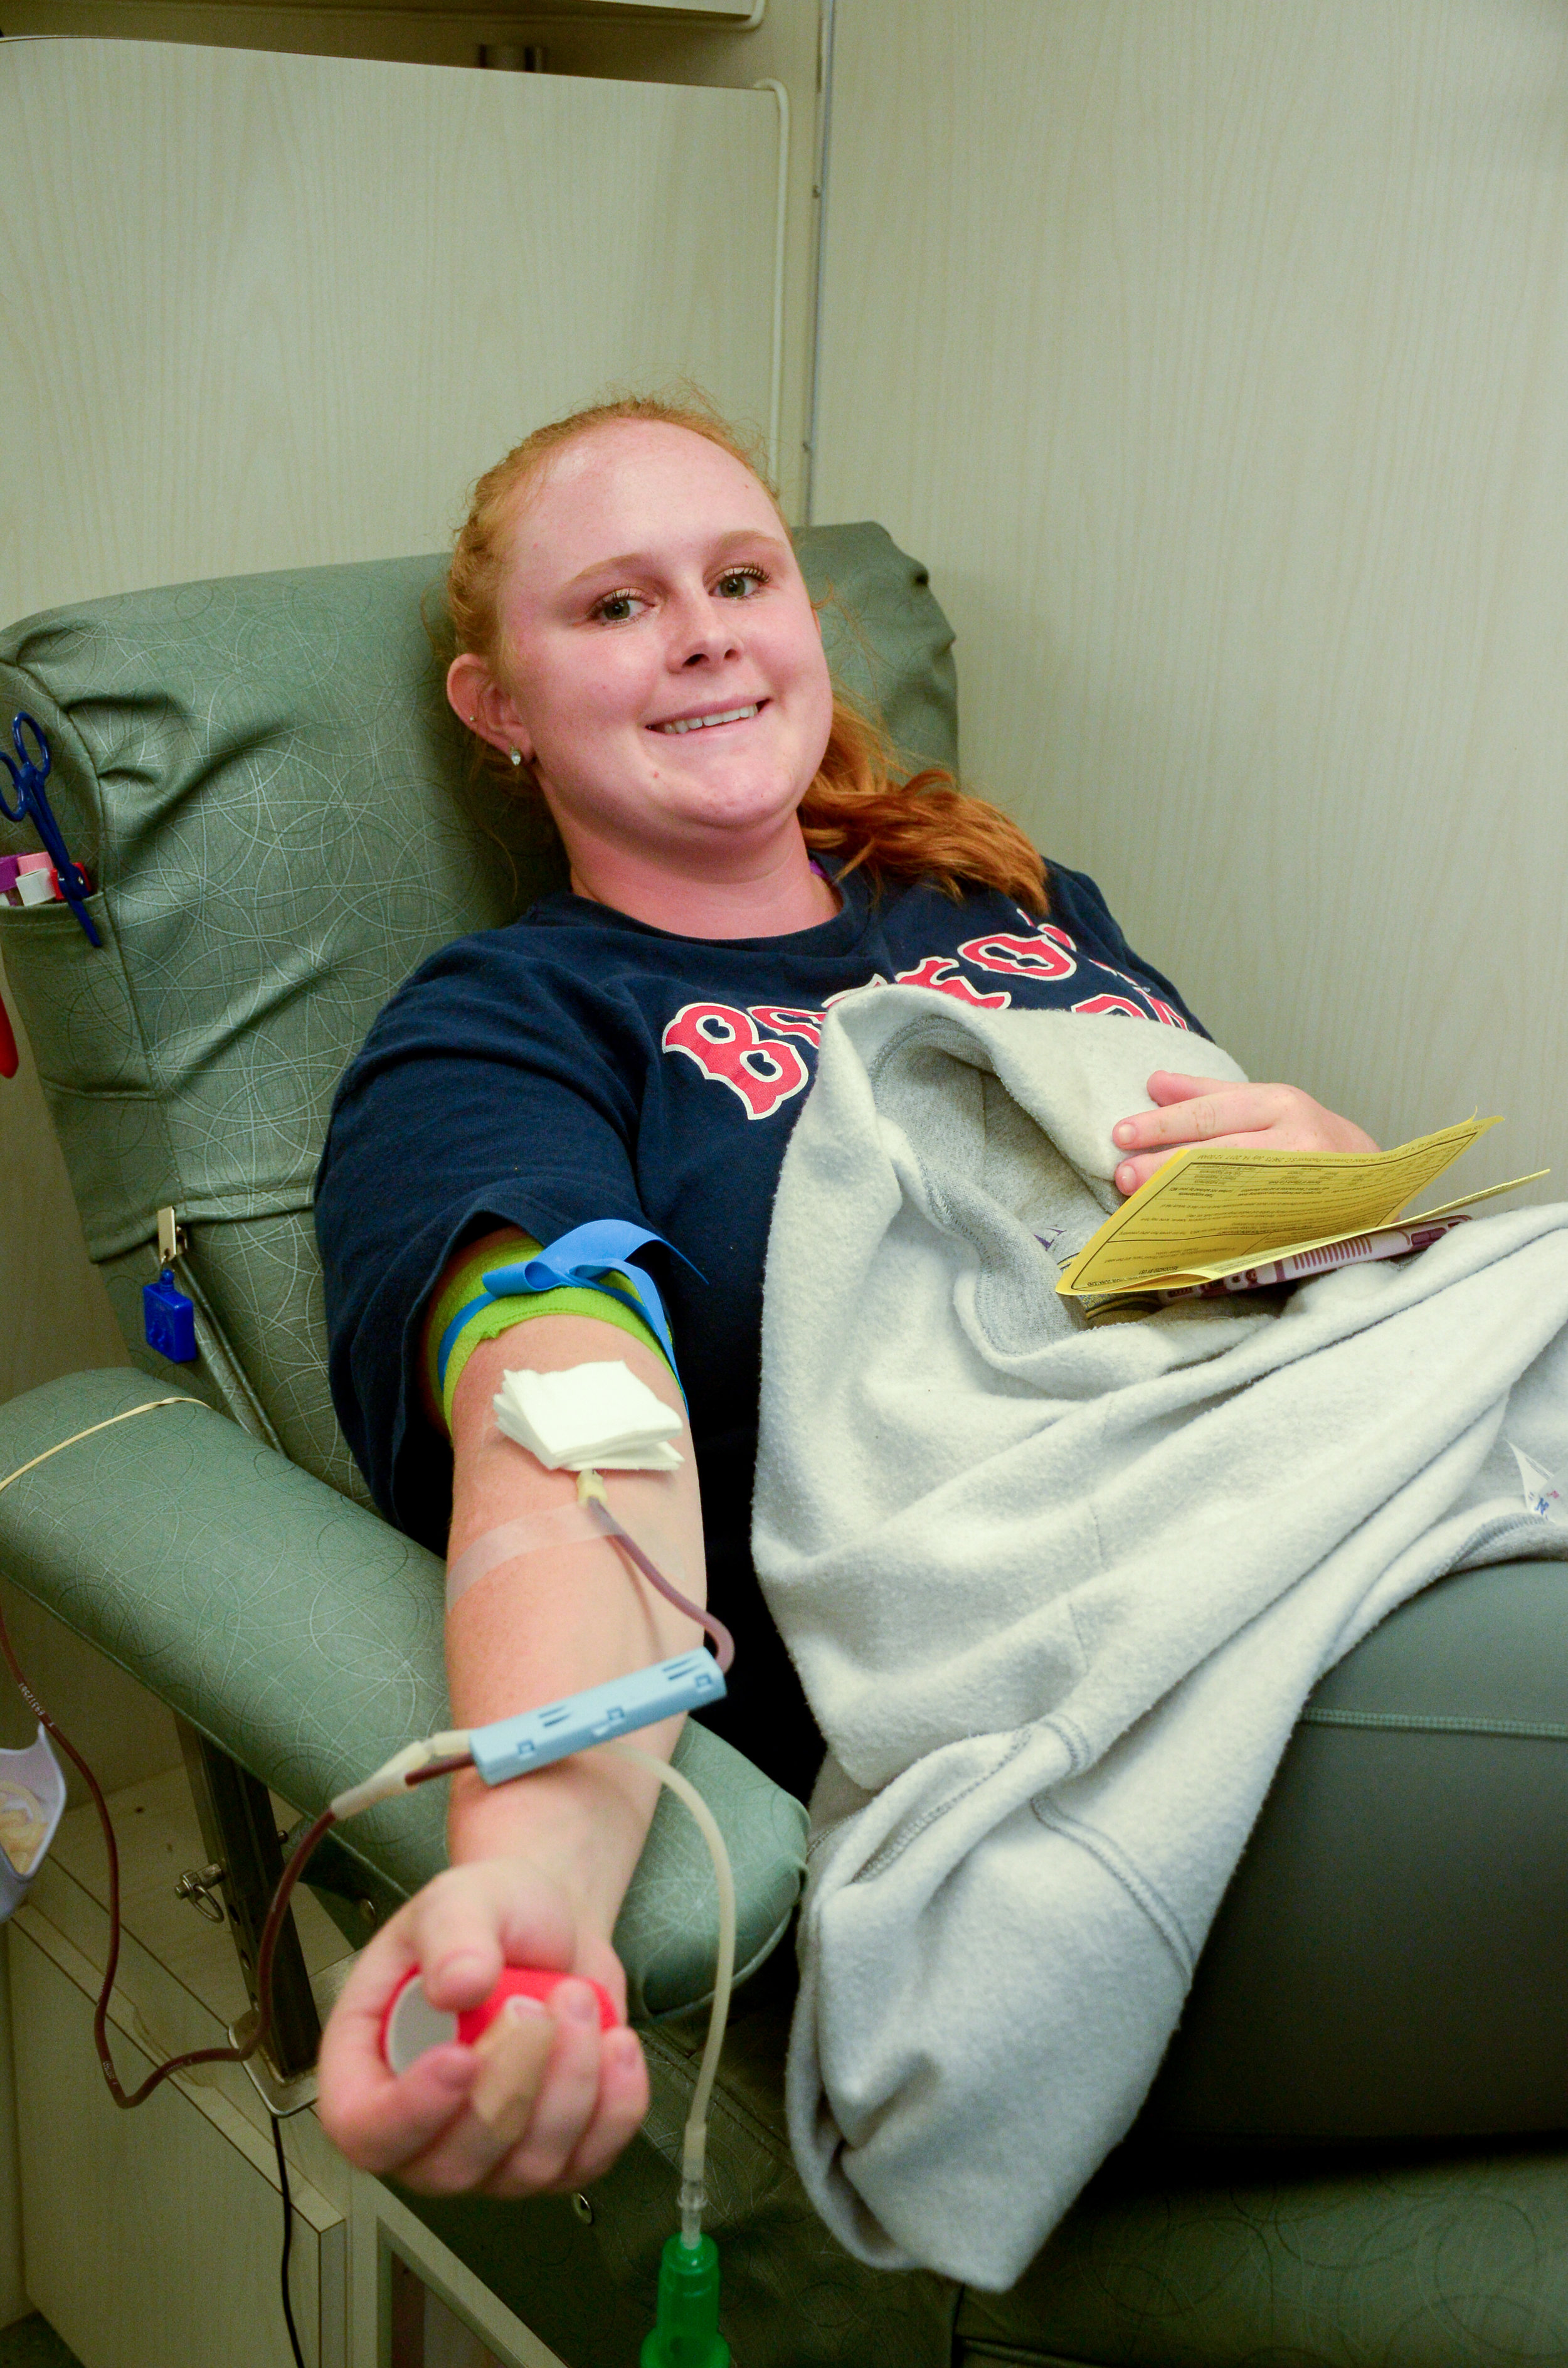 Senior Morgan Reece has been giving blood since her freshman year and states that, "It's just an easy way to give back to the community."